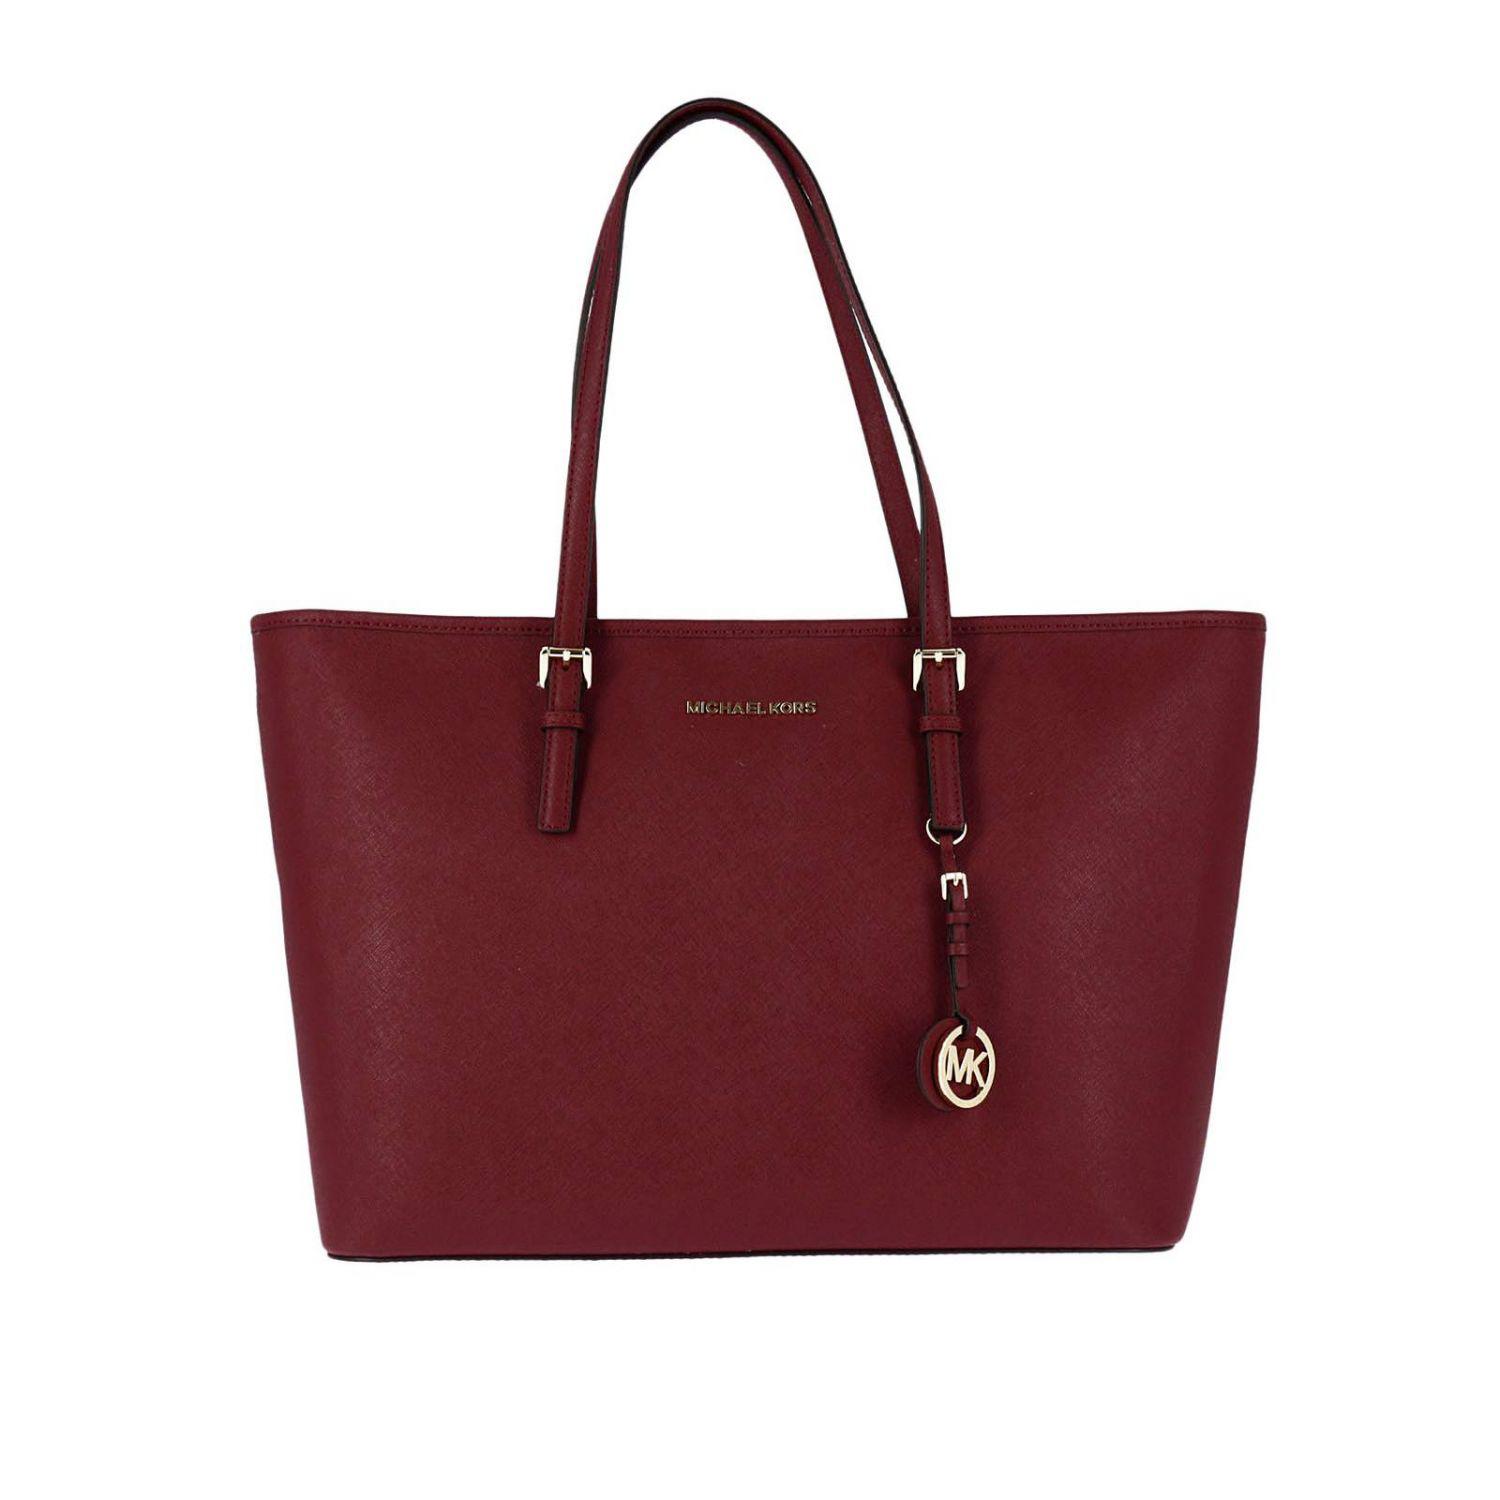 Lyst - Michael Michael Kors Large Jet Set Travel Tote Bag In Saffiano Leather in Red